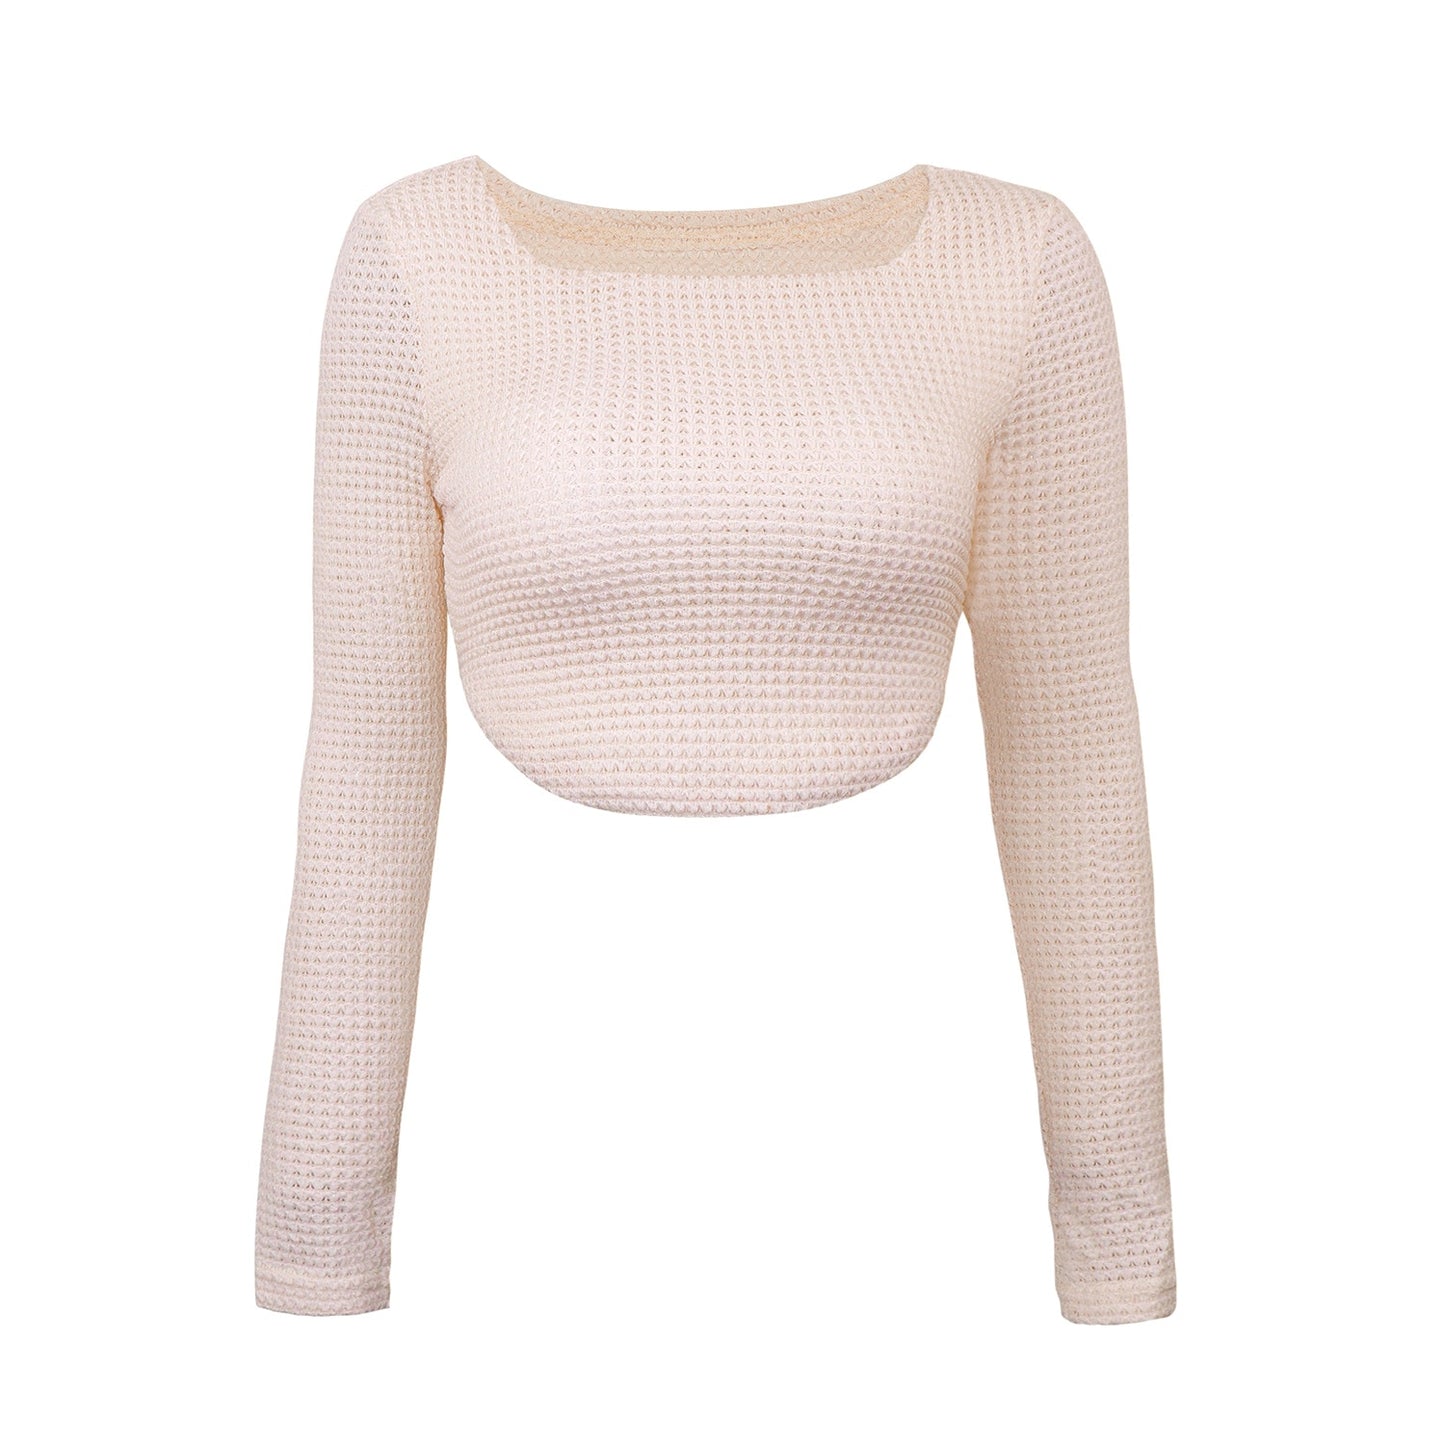 Long Sleeve Square Neck Knitted Crop Top Women Y2k Sexy T Shirts